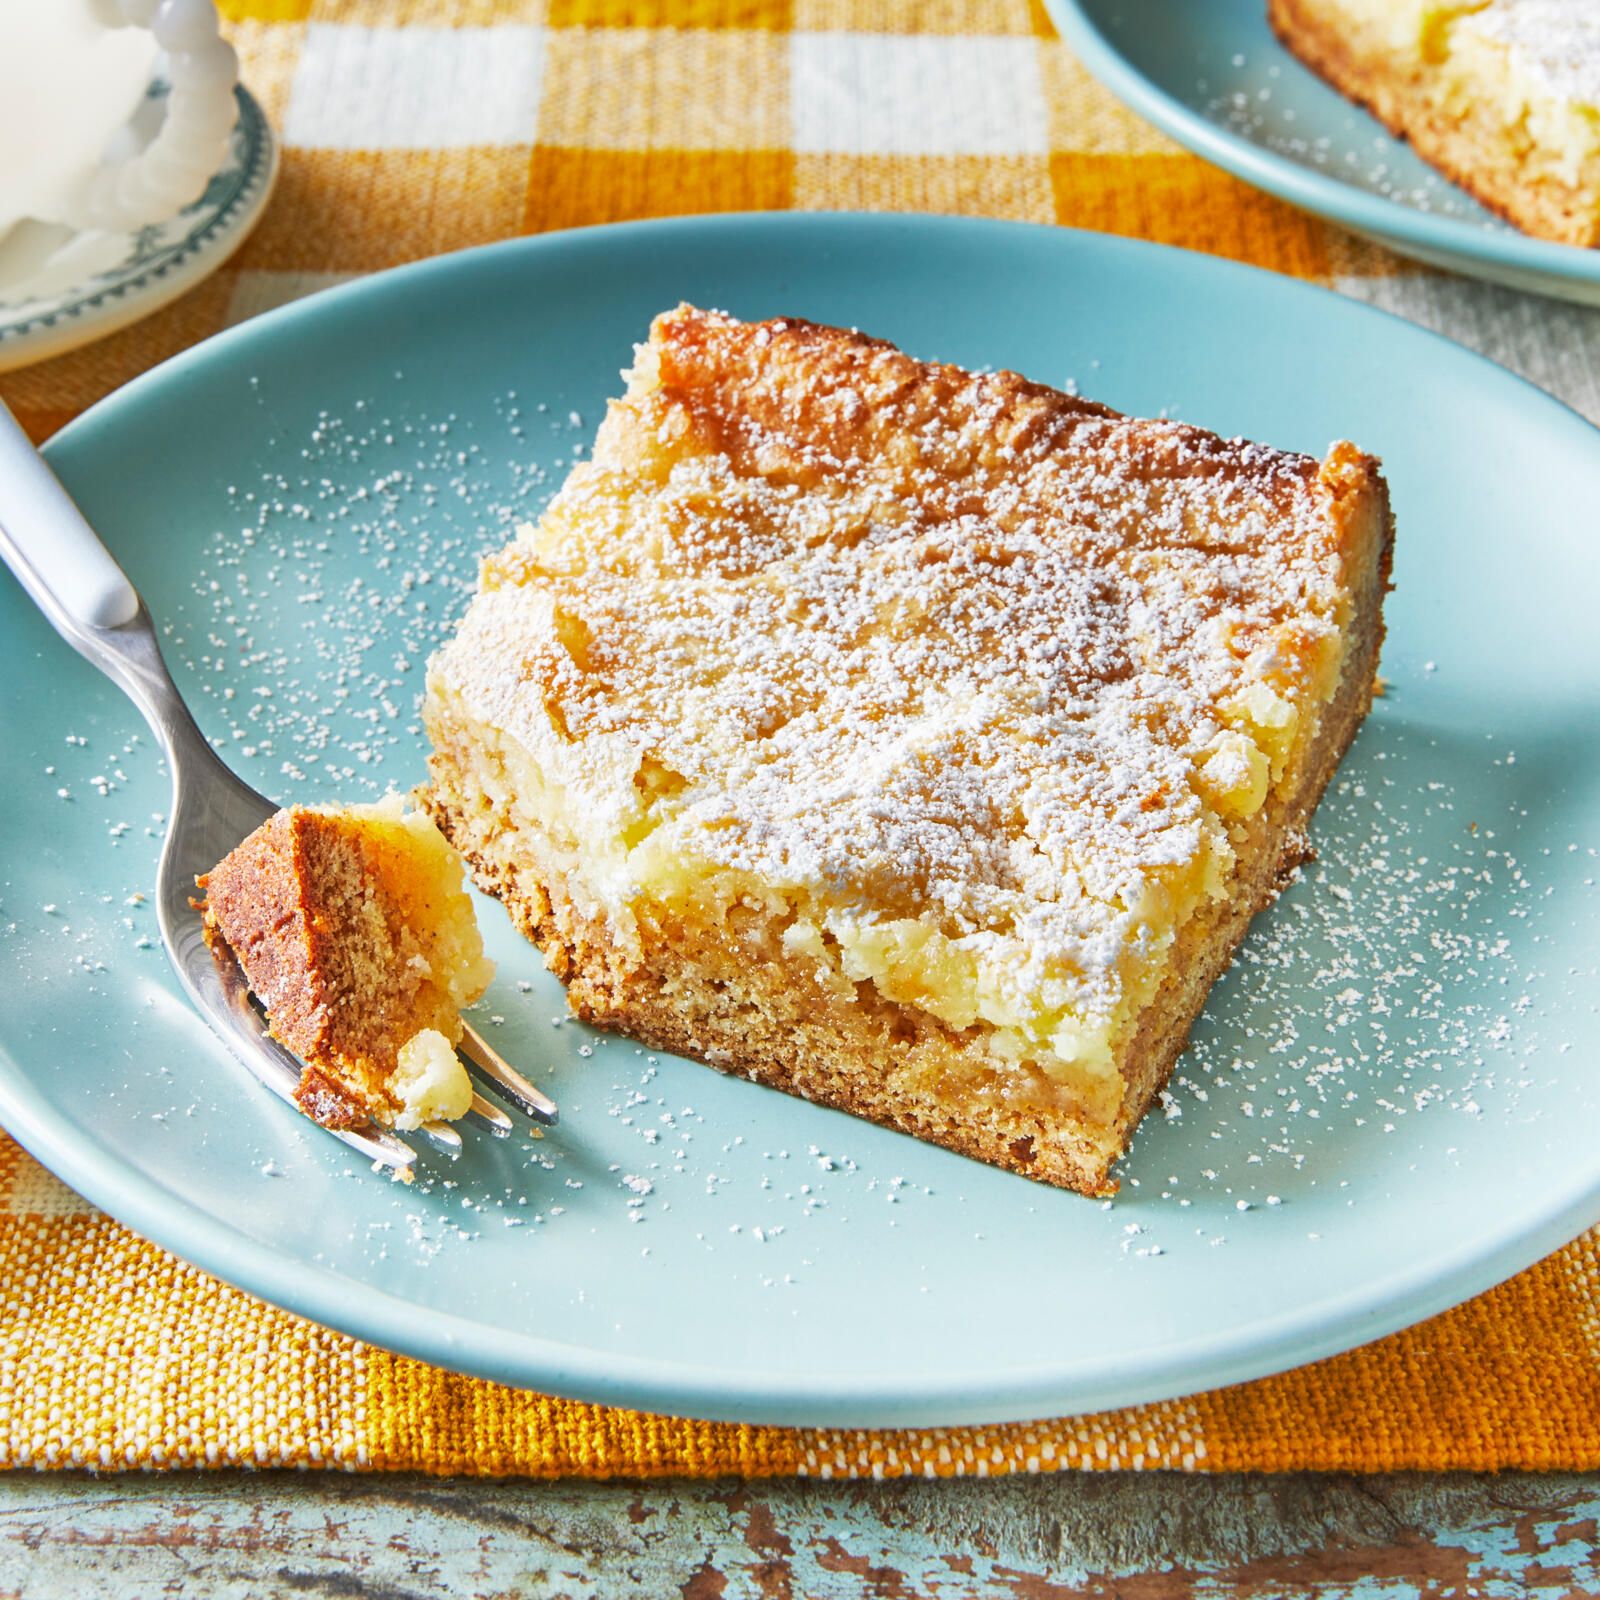 St. Louis Gooey Butter Cake Recipe - NYT Cooking